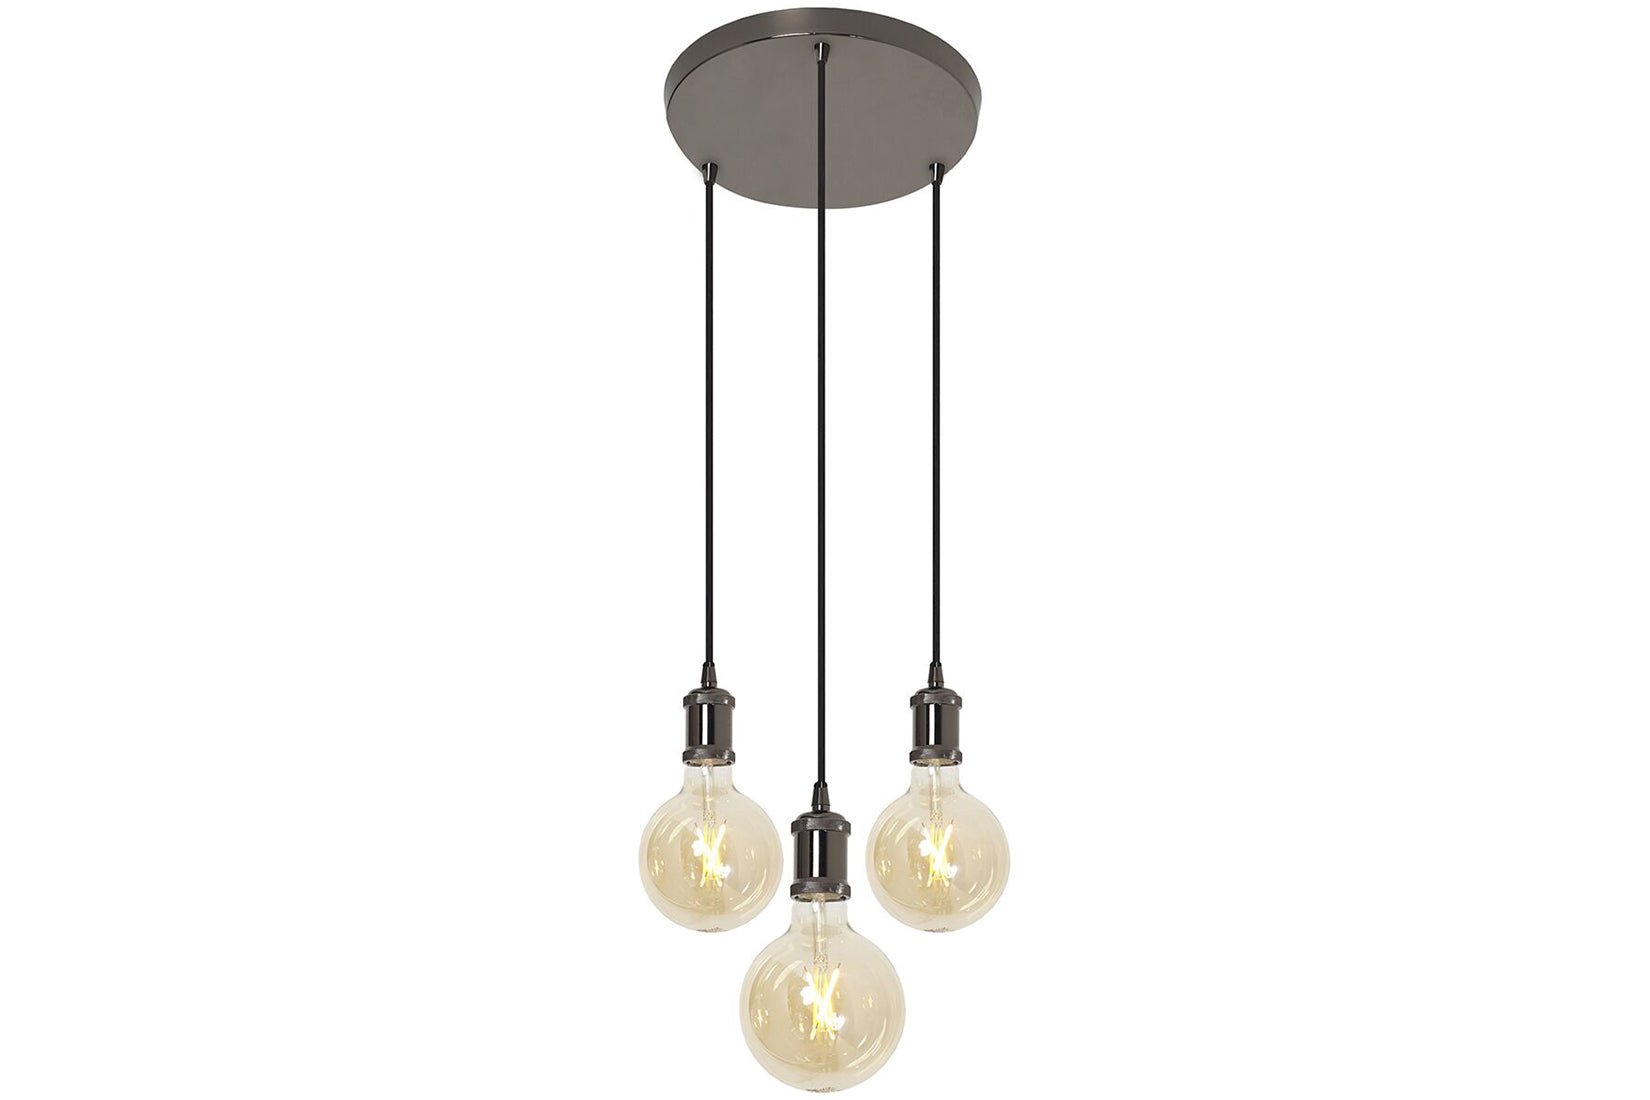 4lite WiZ Connected Smart LED 3-Way Plate Pendant with G125 Amber Vintage Bulbs - maplin.co.uk